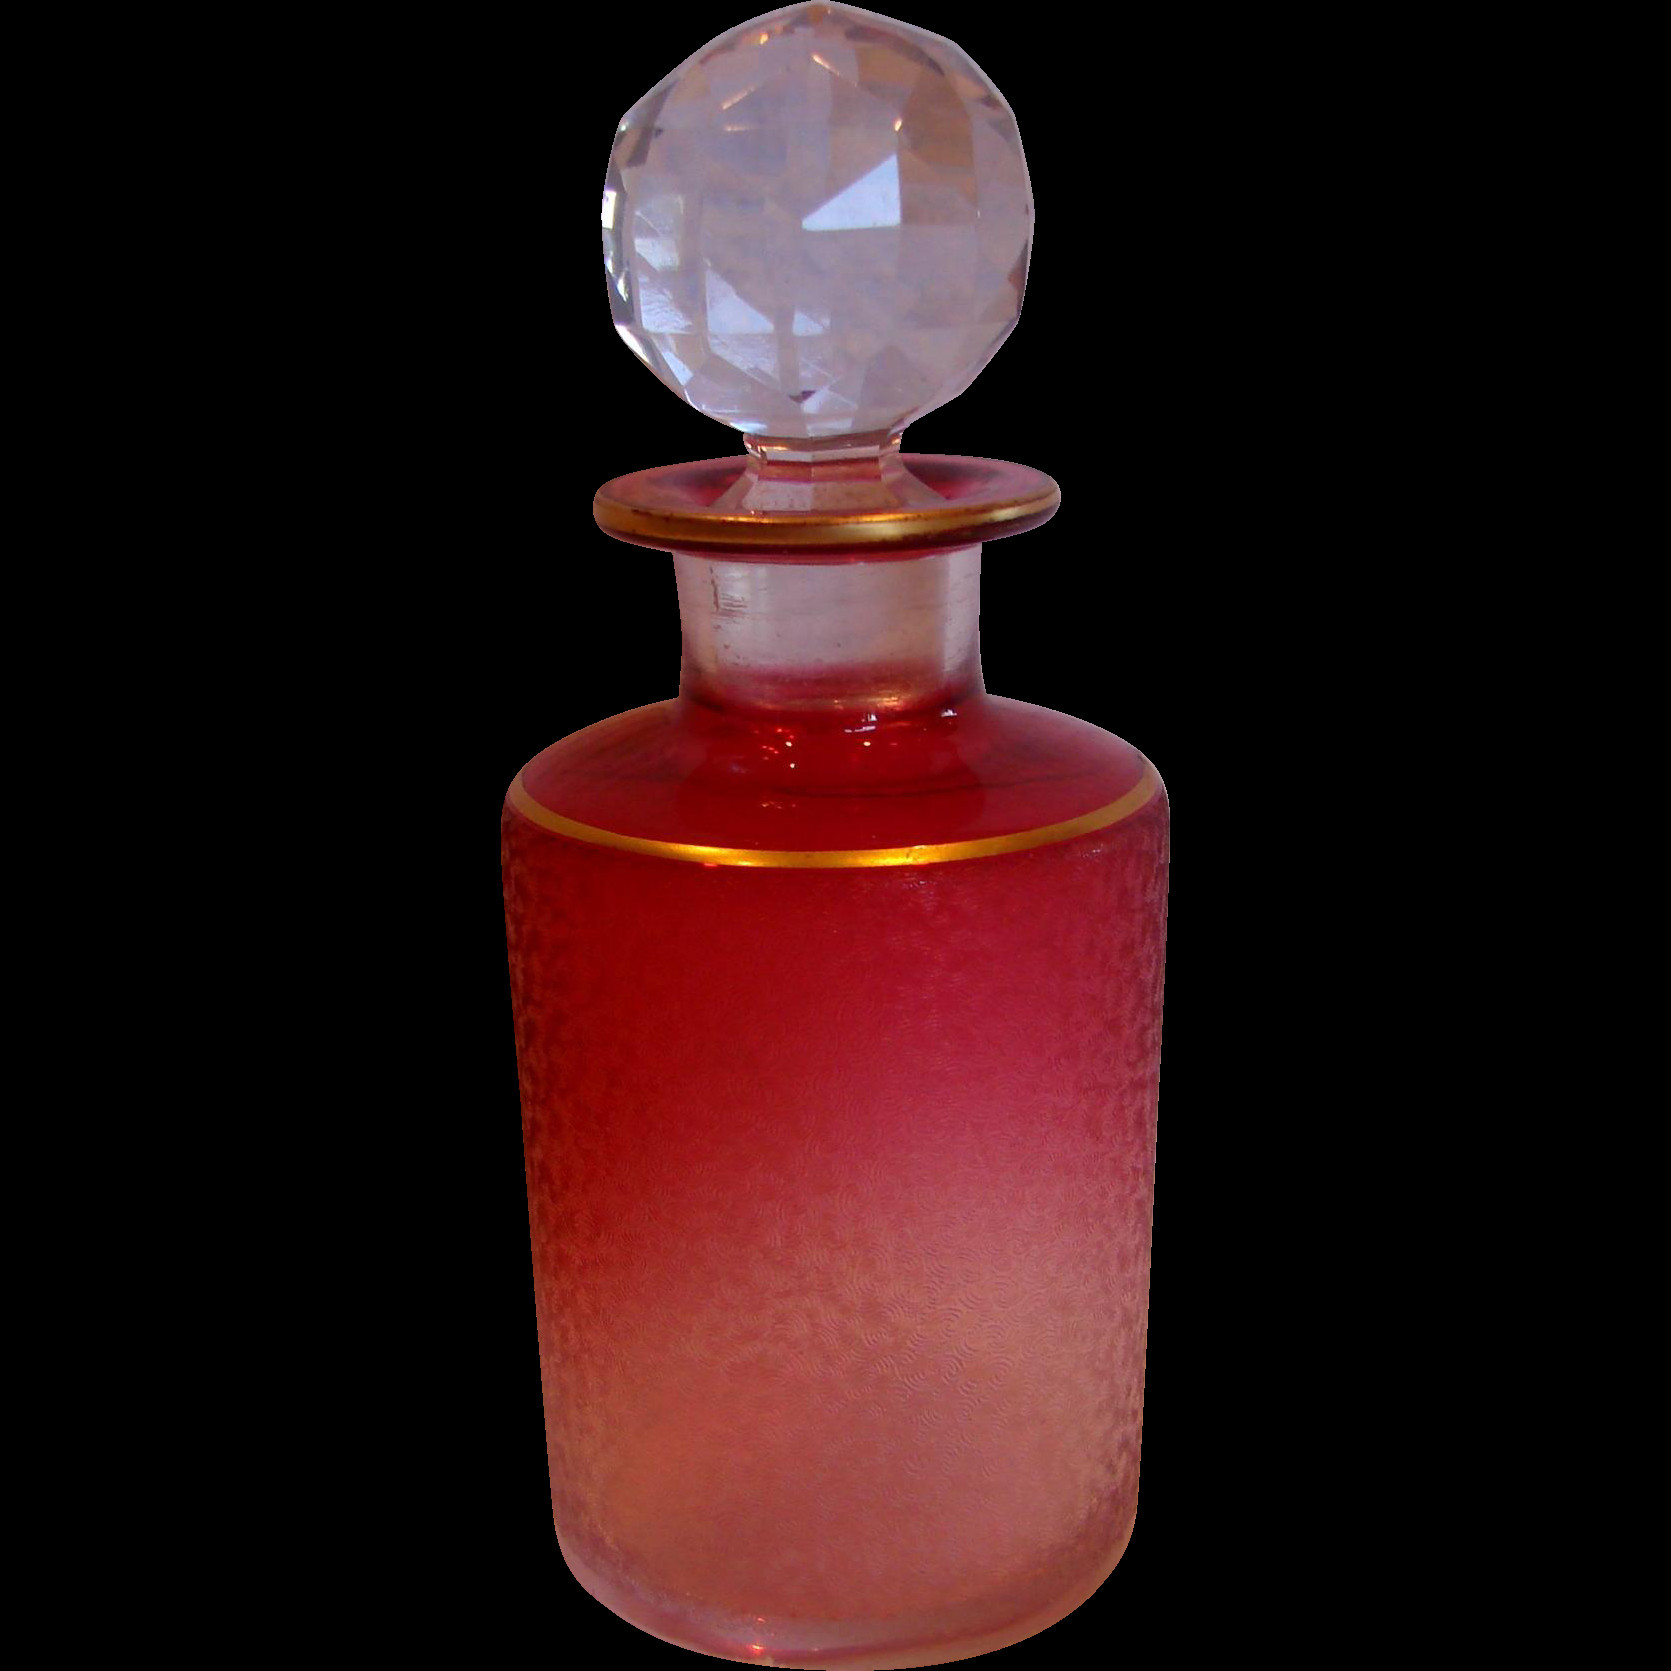 28 Awesome Baccarat Harmonie Bud Vase 2023 free download baccarat harmonie bud vase of french baccarat crystal art glass etched scent perfume bottle within french baccarat crystal art glass etched scent perfume bottle cologne rubena rubina